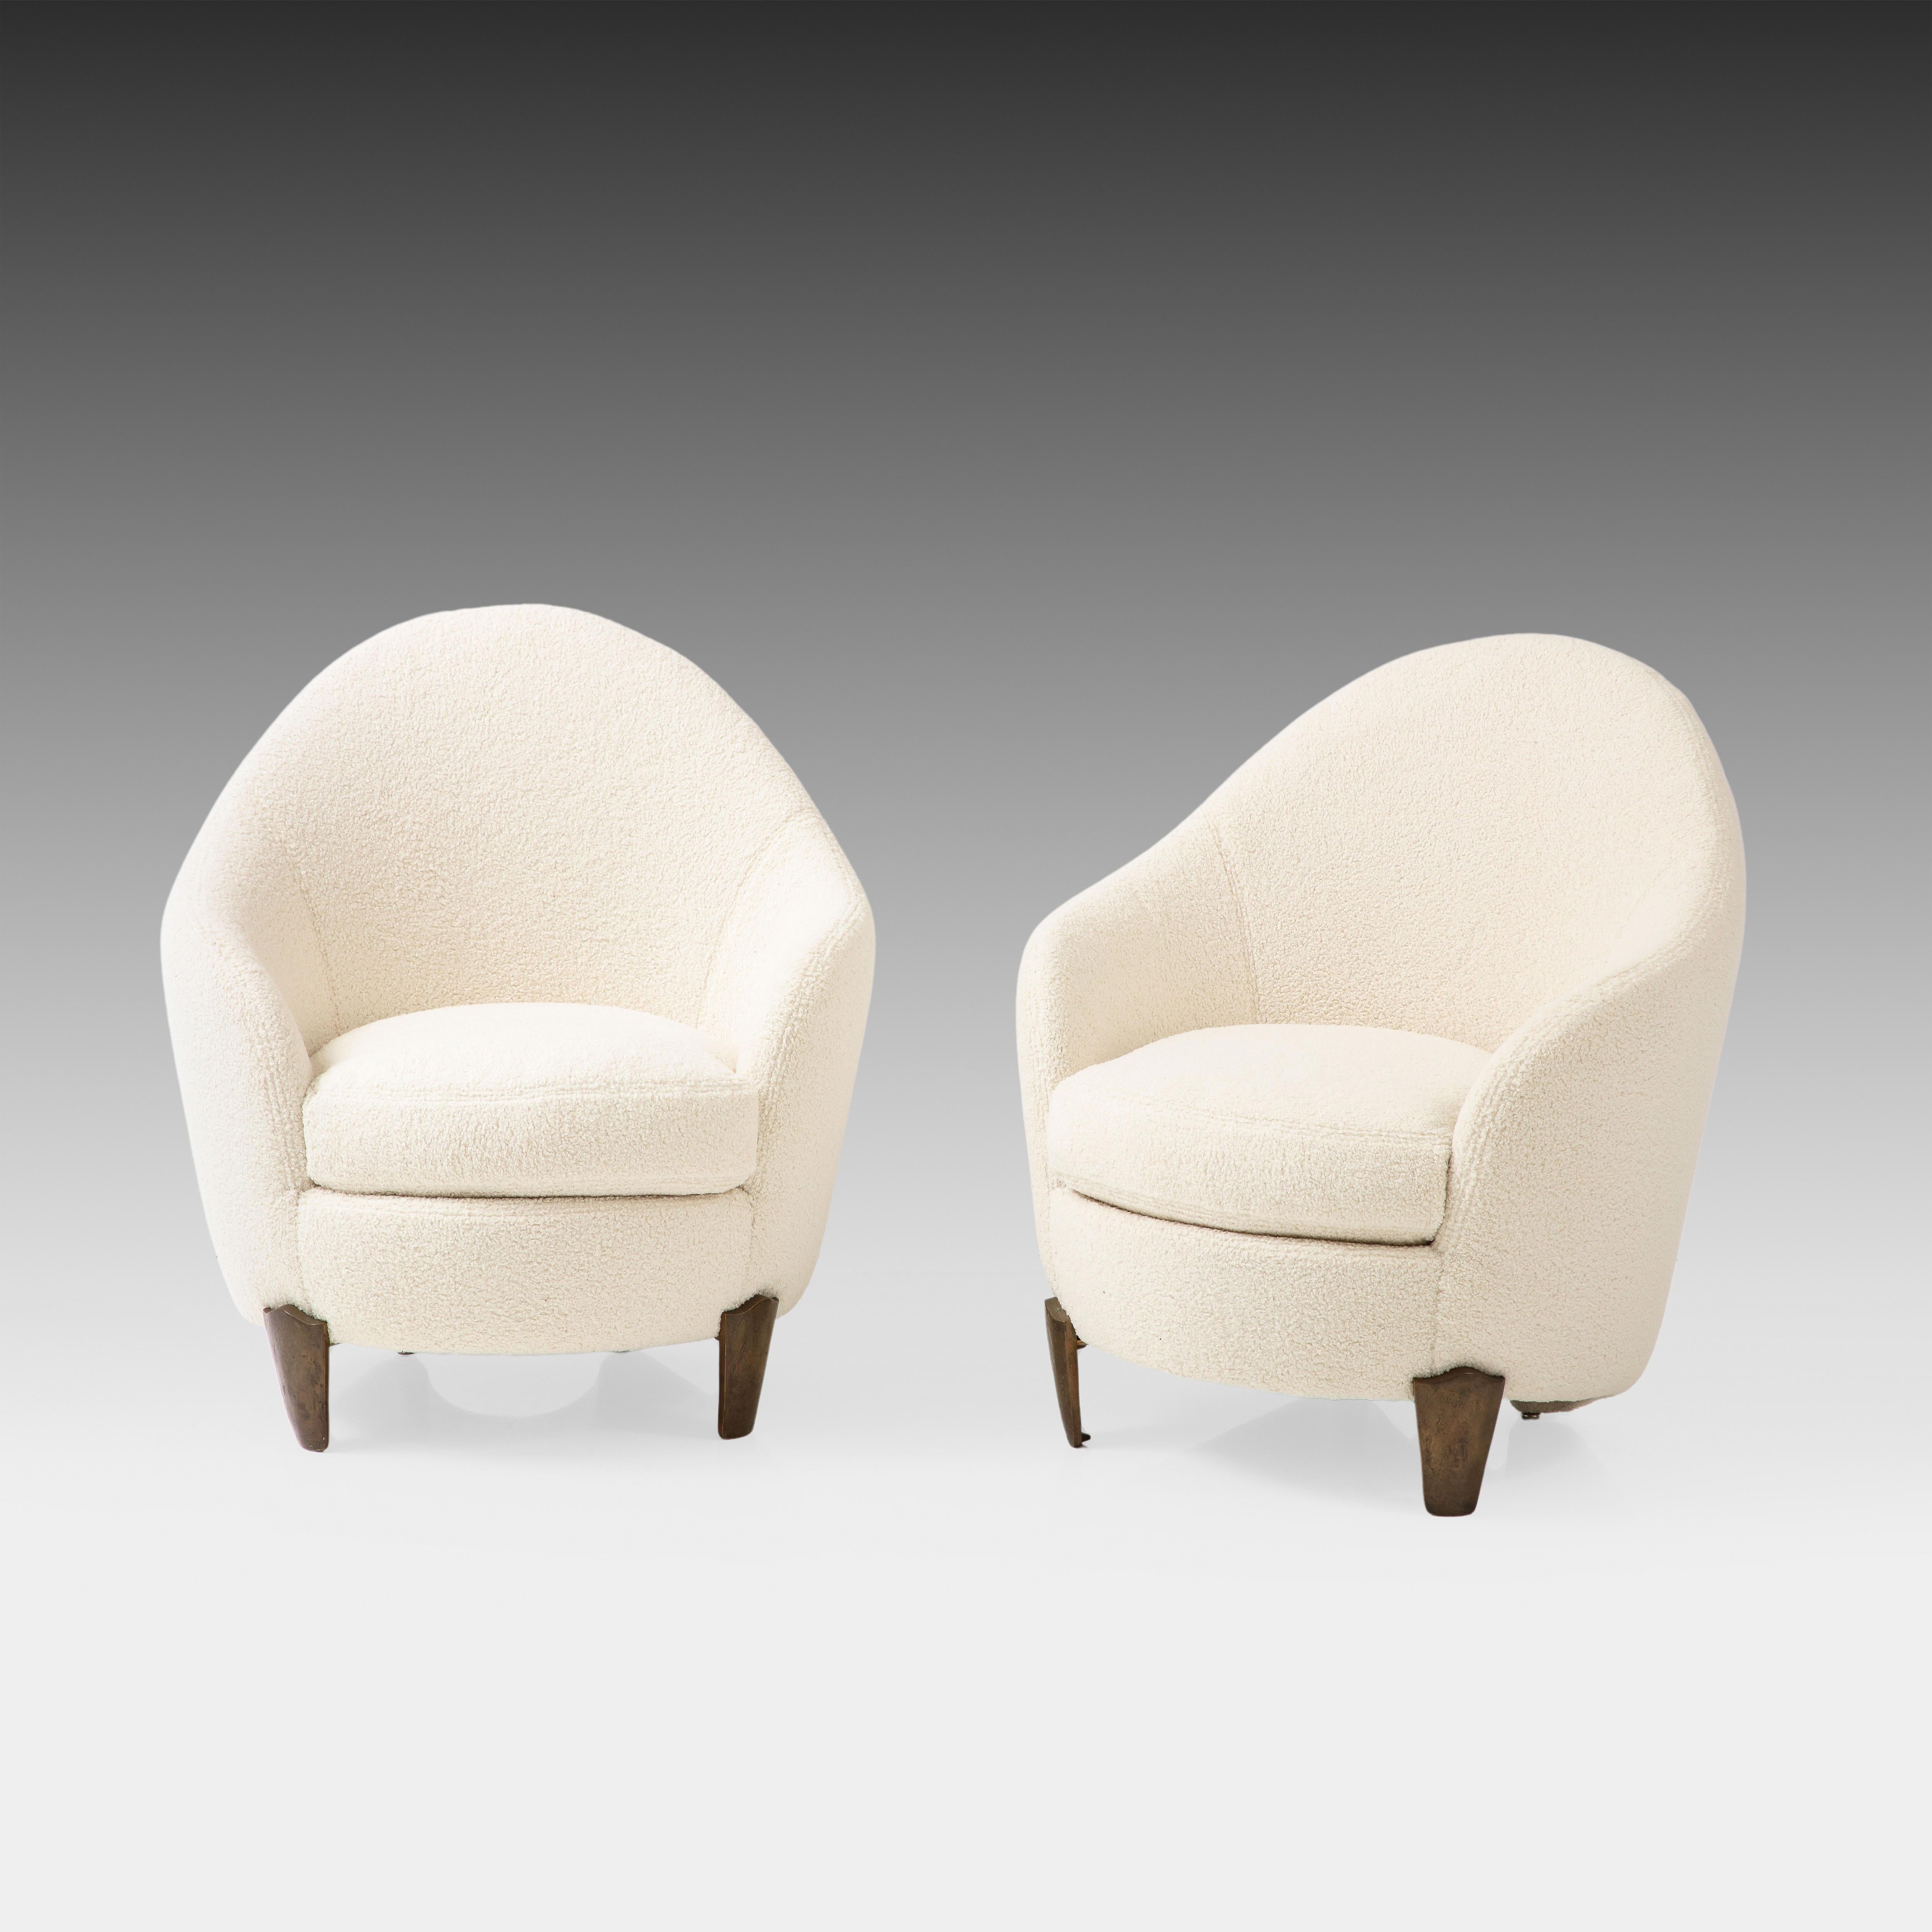 Elizabeth Garouste and Mattia Bonetti elegant and chic pair of Koala armchairs or lounge chairs in ivory bouclé with cast patinated bronze legs impressed with monogram 